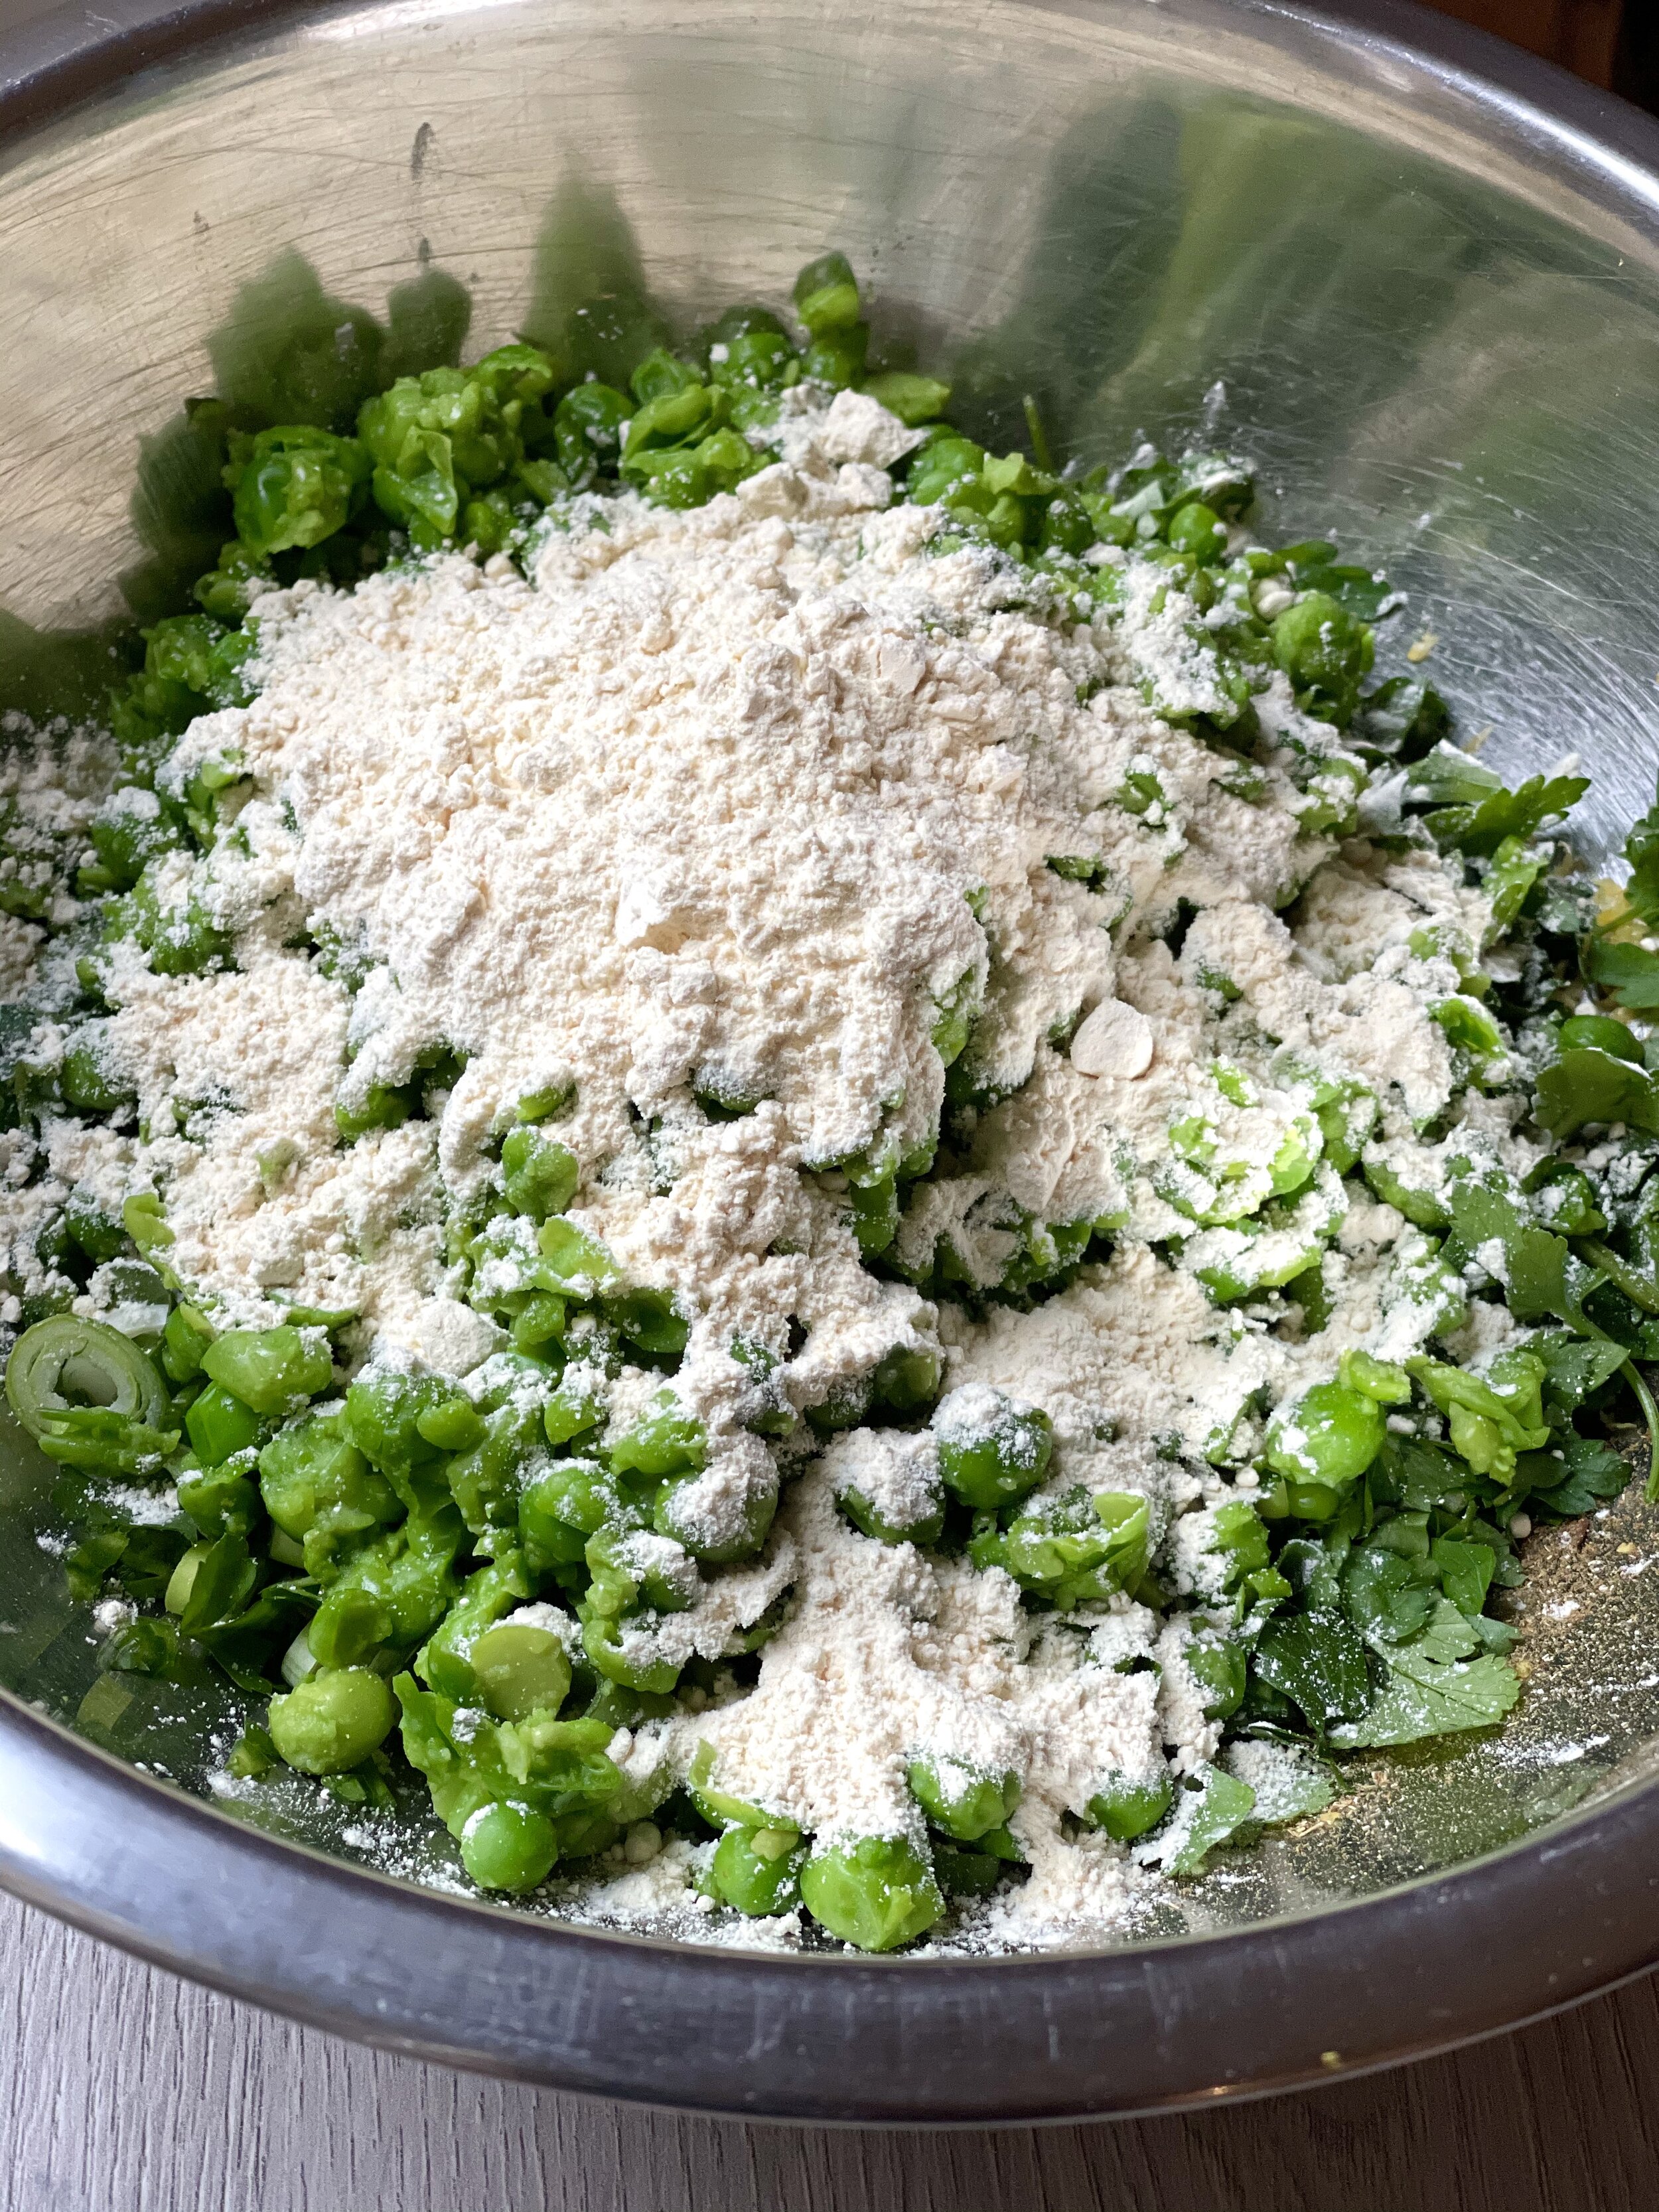 Gram flour and peas for pea fritters